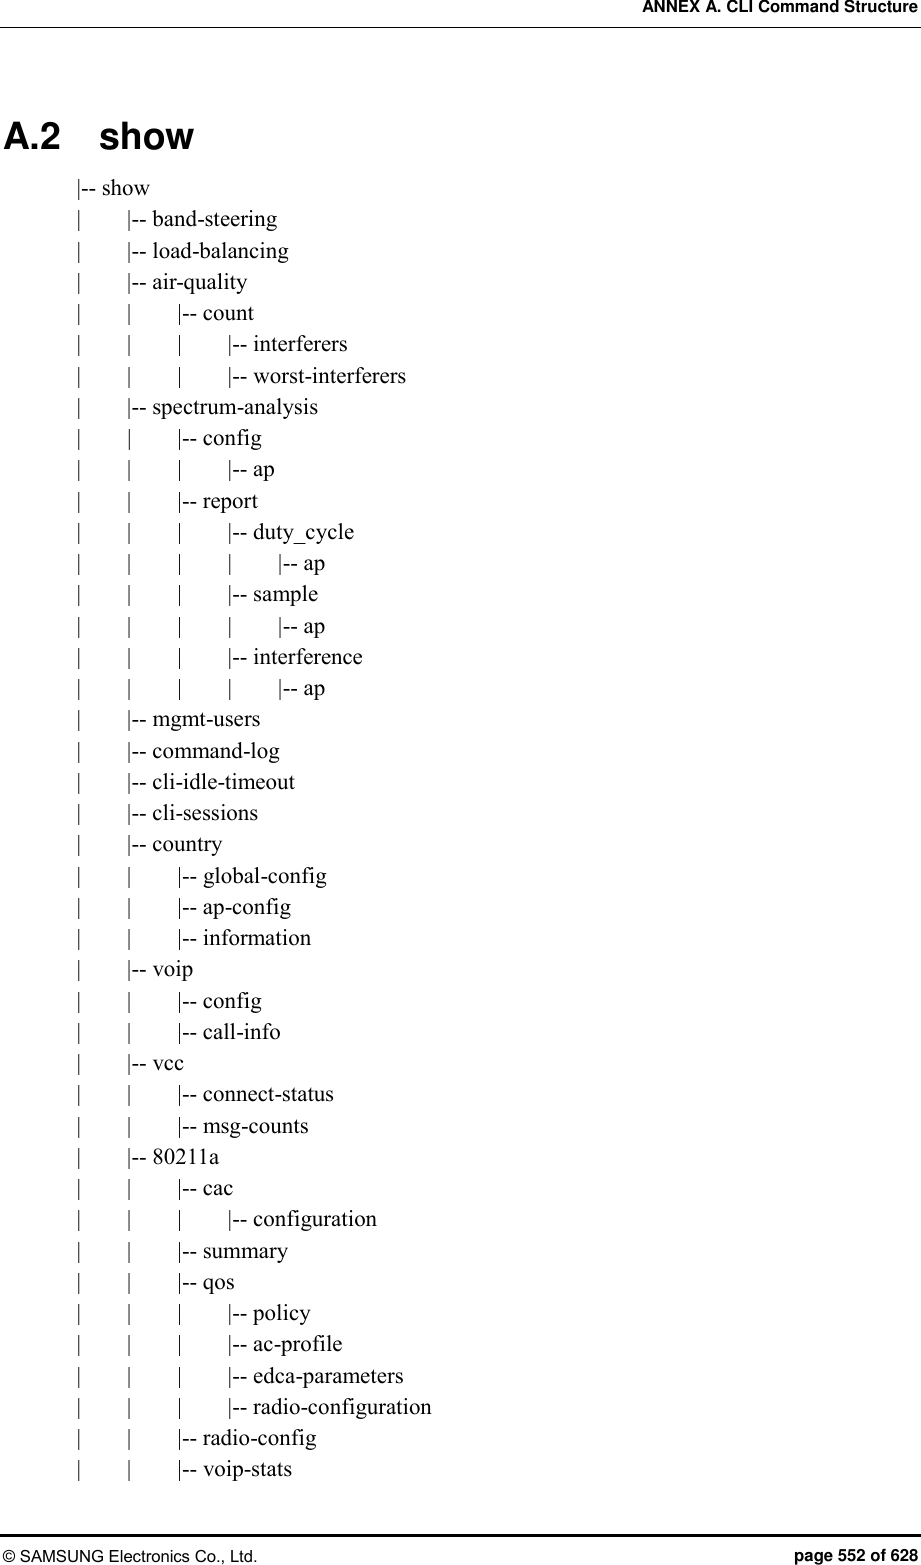 ANNEX A. CLI Command Structure © SAMSUNG Electronics Co., Ltd.  page 552 of 628 A.2  show |-- show |        |-- band-steering |        |-- load-balancing |        |-- air-quality |        |        |-- count |        |        |        |-- interferers |        |        |        |-- worst-interferers |        |-- spectrum-analysis |        |        |-- config |        |        |        |-- ap |        |        |-- report |        |        |        |-- duty_cycle |        |        |        |        |-- ap |        |        |        |-- sample |        |        |        |        |-- ap |        |        |        |-- interference |        |        |        |        |-- ap |        |-- mgmt-users |        |-- command-log |        |-- cli-idle-timeout |        |-- cli-sessions |        |-- country |        |        |-- global-config |        |        |-- ap-config |        |        |-- information |        |-- voip |        |        |-- config |        |        |-- call-info |        |-- vcc |        |        |-- connect-status |        |        |-- msg-counts |        |-- 80211a |        |        |-- cac |        |        |        |-- configuration |        |        |-- summary |        |        |-- qos |        |        |        |-- policy |        |        |        |-- ac-profile |        |        |        |-- edca-parameters |        |        |        |-- radio-configuration |        |        |-- radio-config |        |        |-- voip-stats 